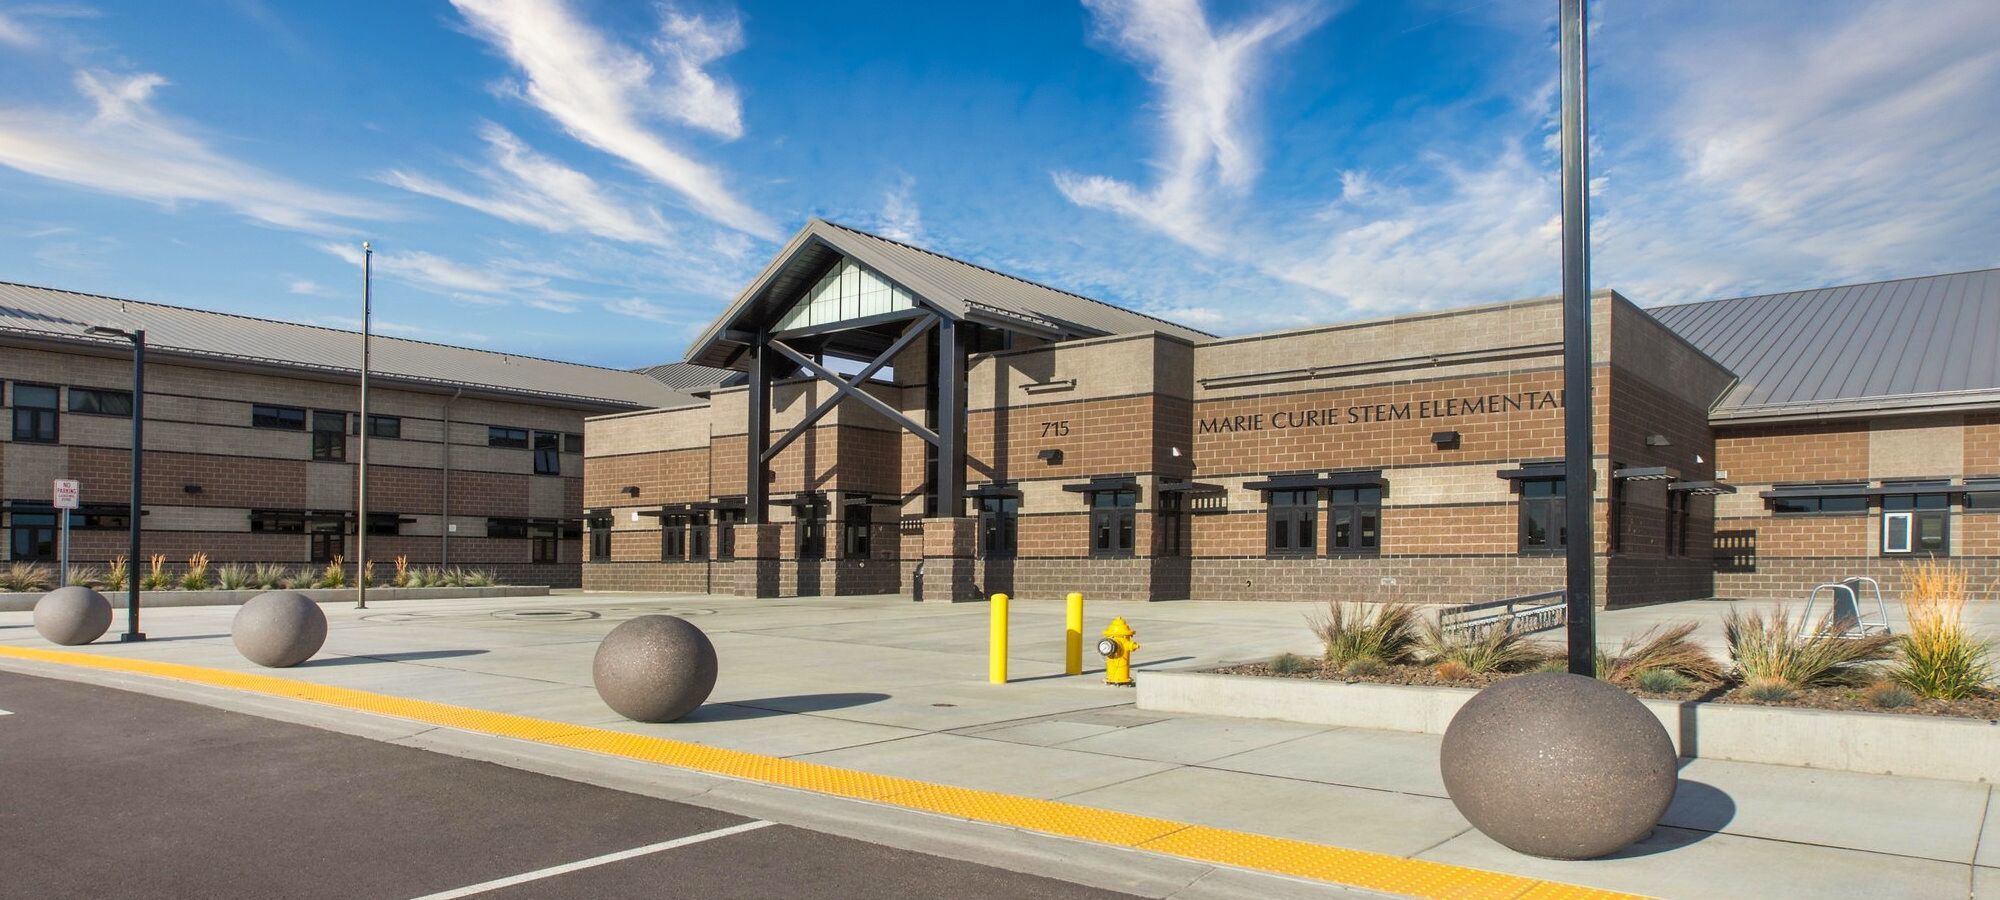 Marie Curie Elementary School Homes for Sale and Information in the Pasco School District in Washington State